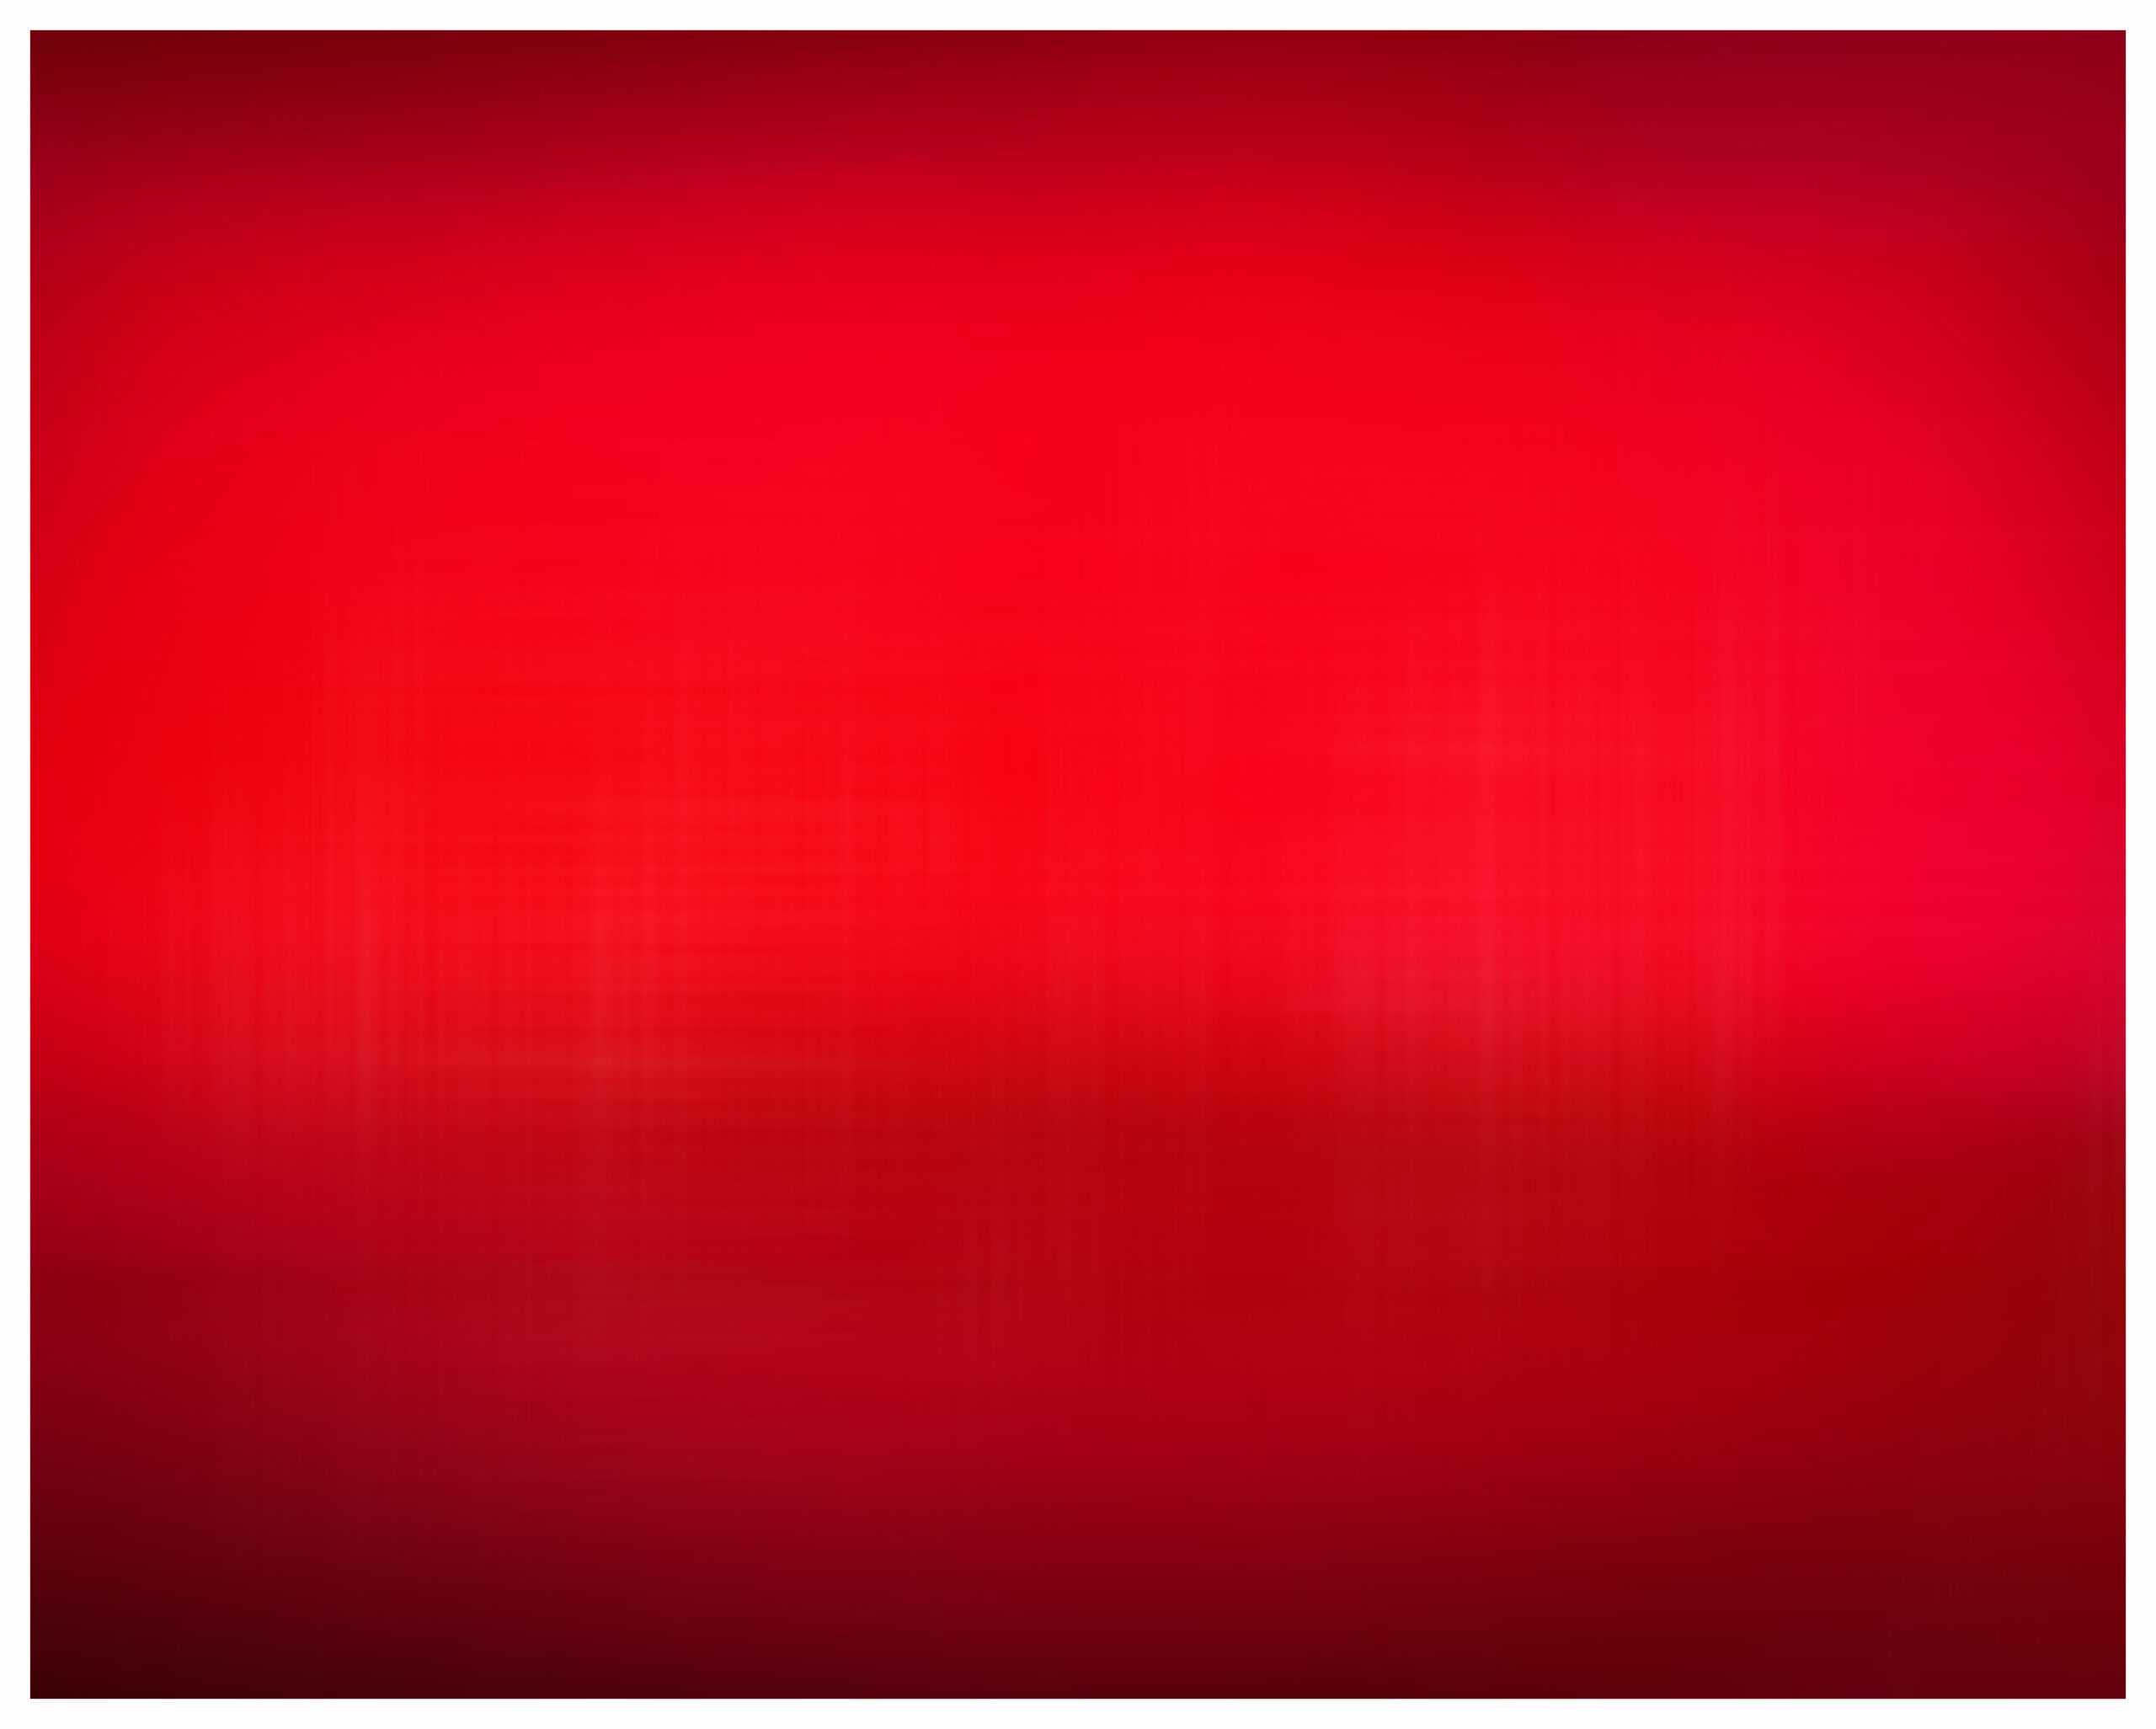 Blurry horizontal photo with multiple shades of red on a color field of red